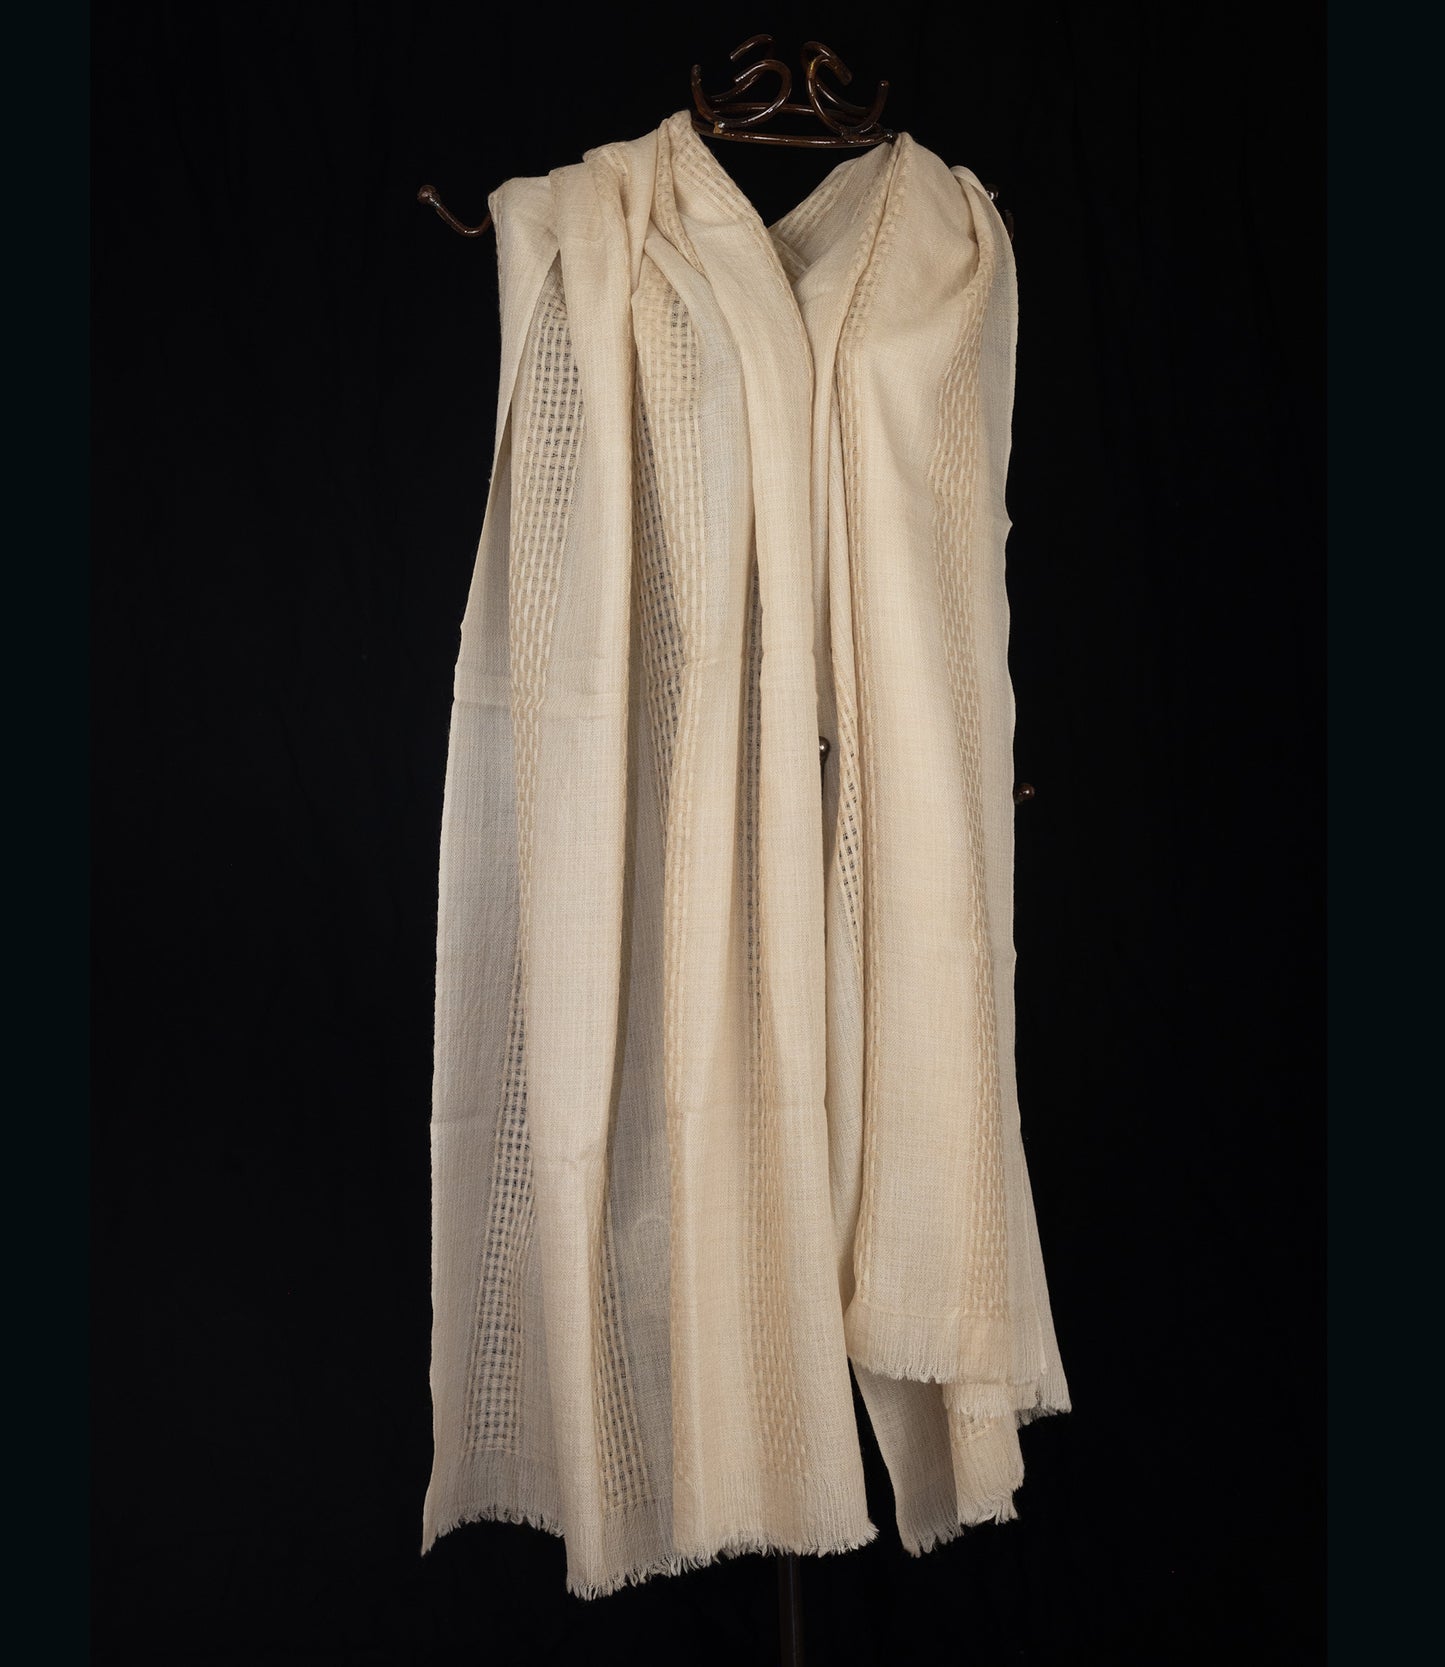 Pure pashmina shawl, natural ivory color, handwoven